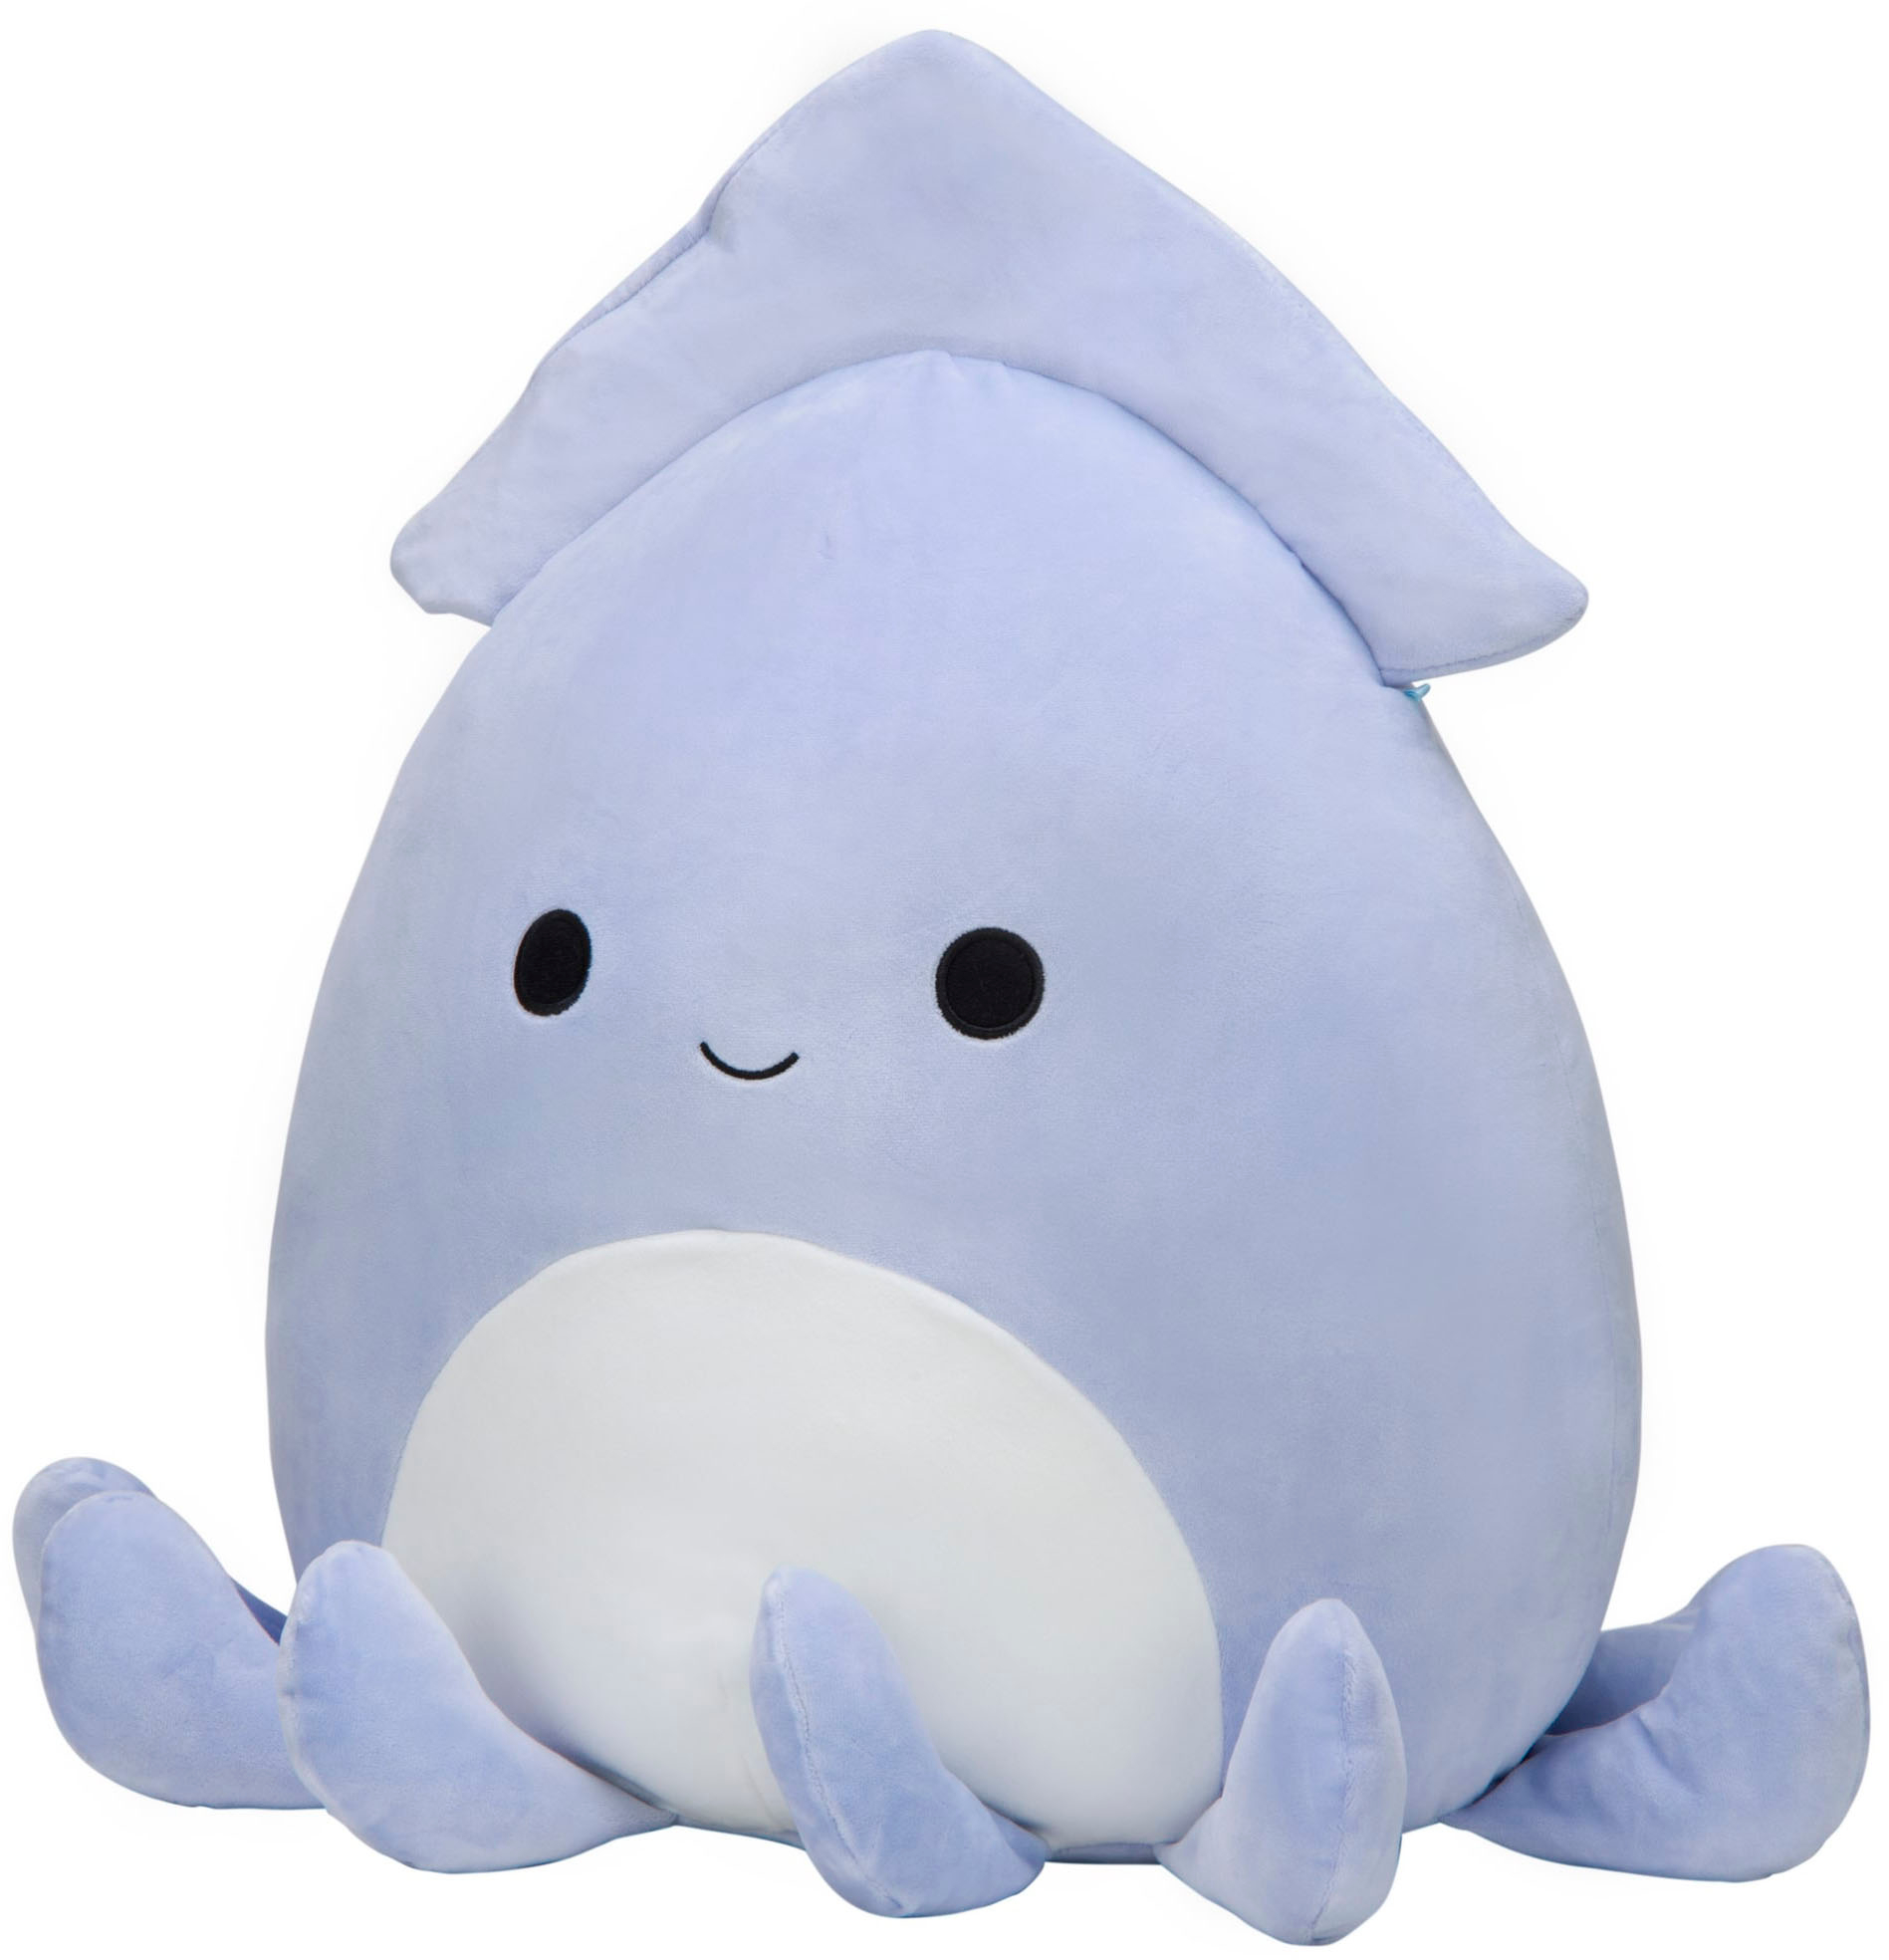 Squishmallows in the Shell Plush Figures